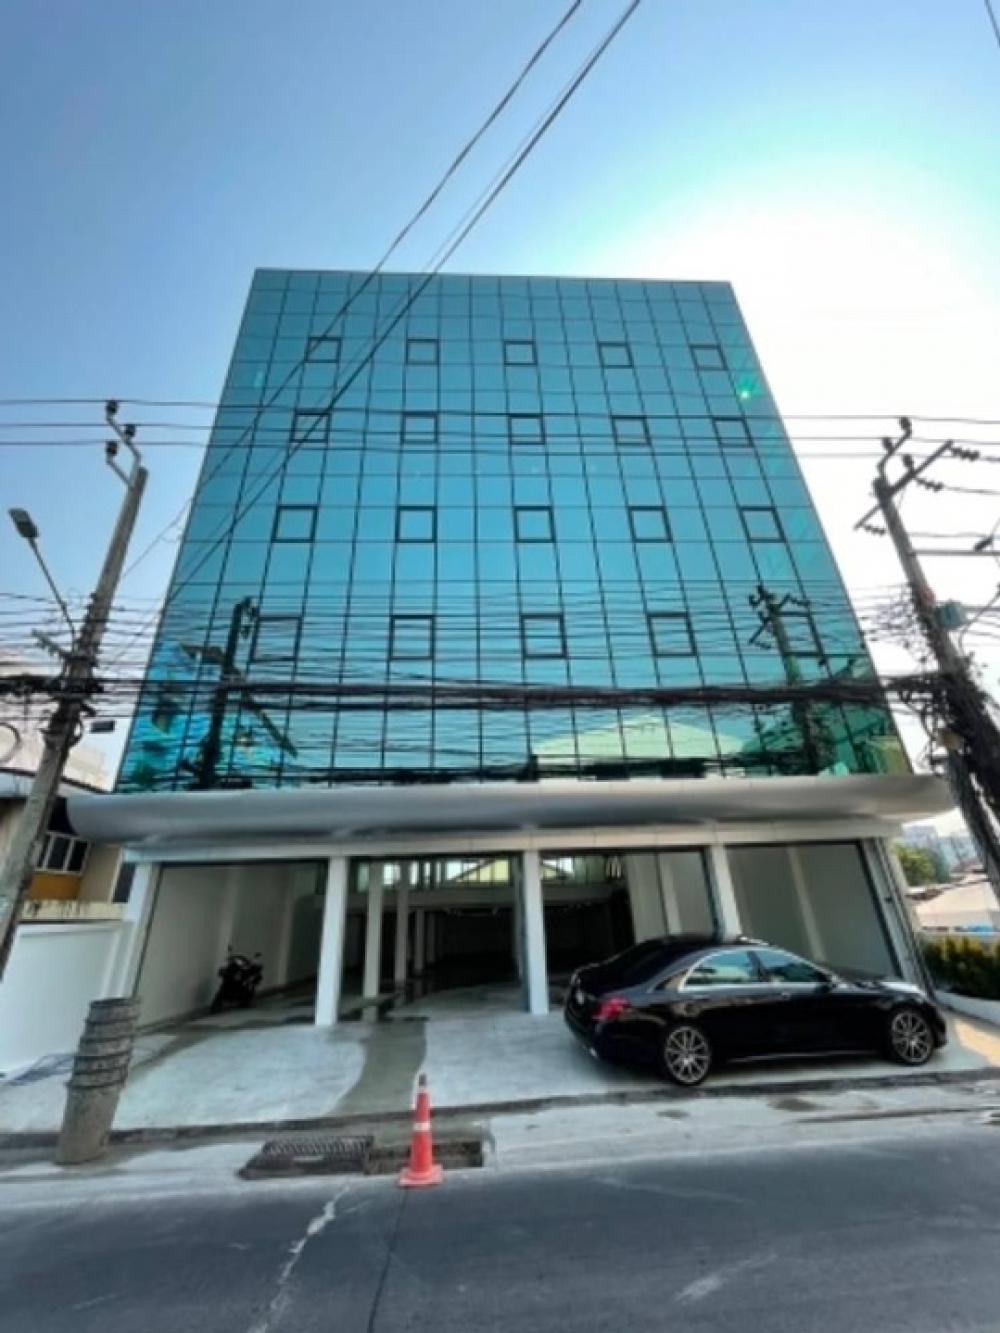 For RentOfficeChokchai 4, Ladprao 71, Ladprao 48, : For rent: 6-story office building, Stand Alone type, parking for 16 cars, suitable for an office / product stock / beauty clinic. /Sell products online /Tiktokshop